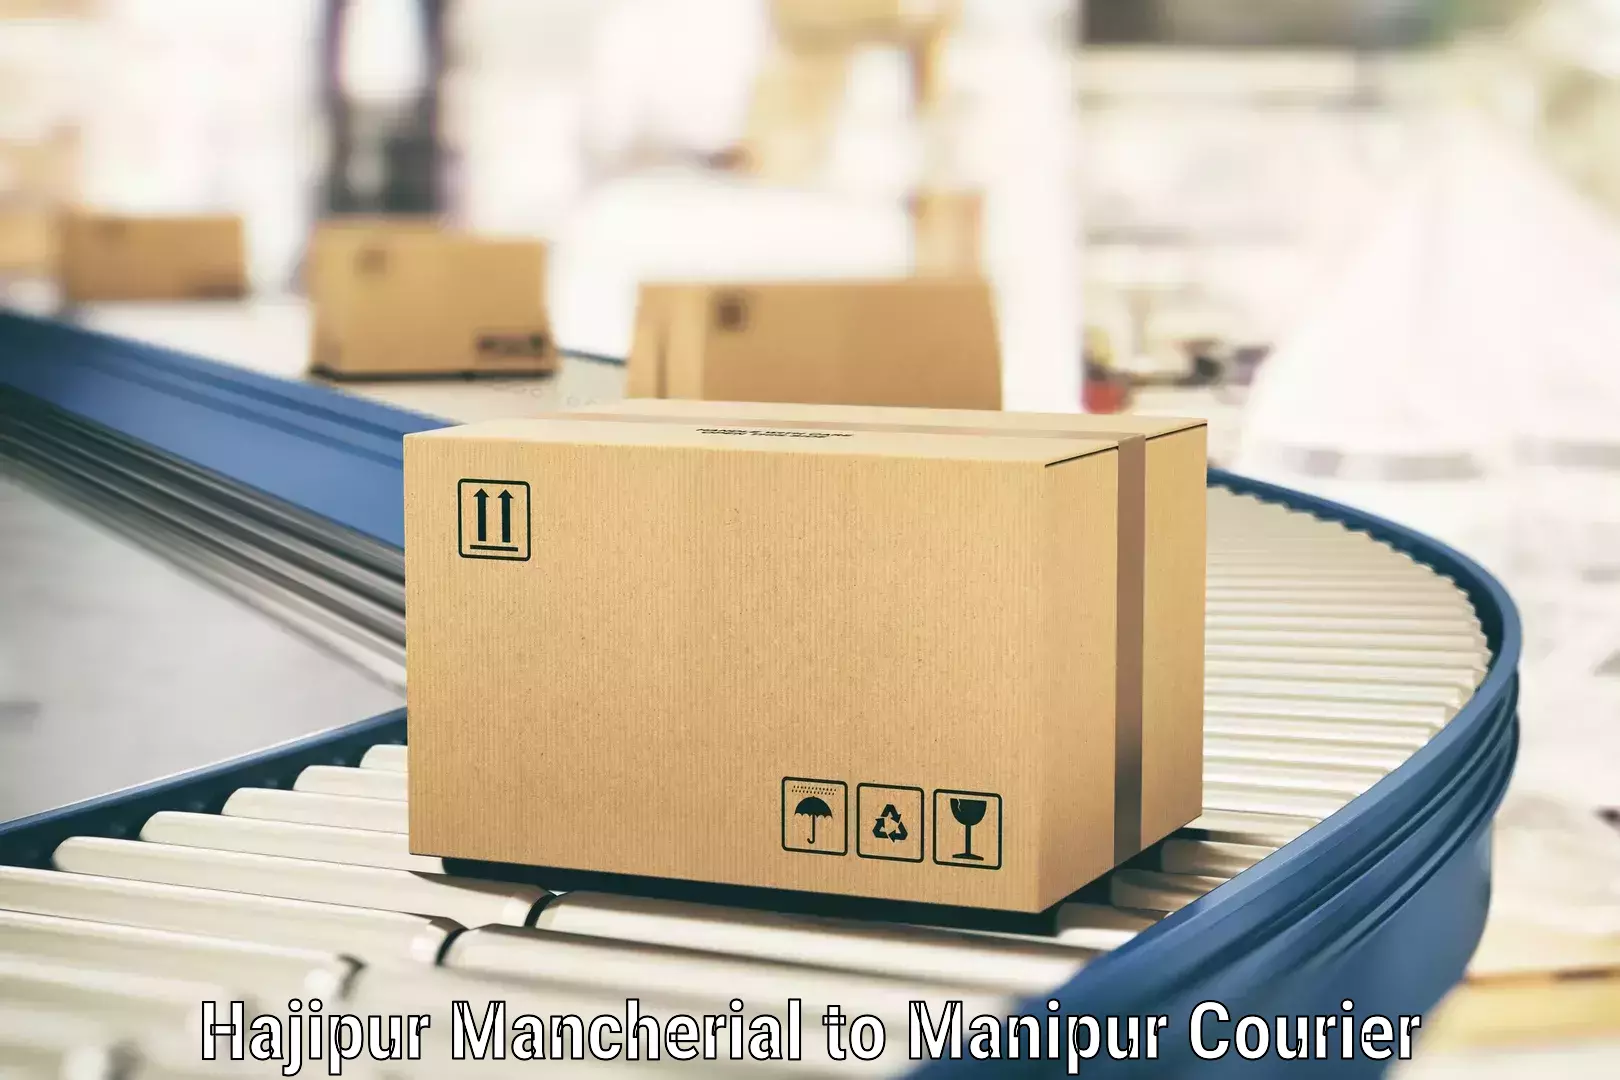 Global courier networks Hajipur Mancherial to Thoubal